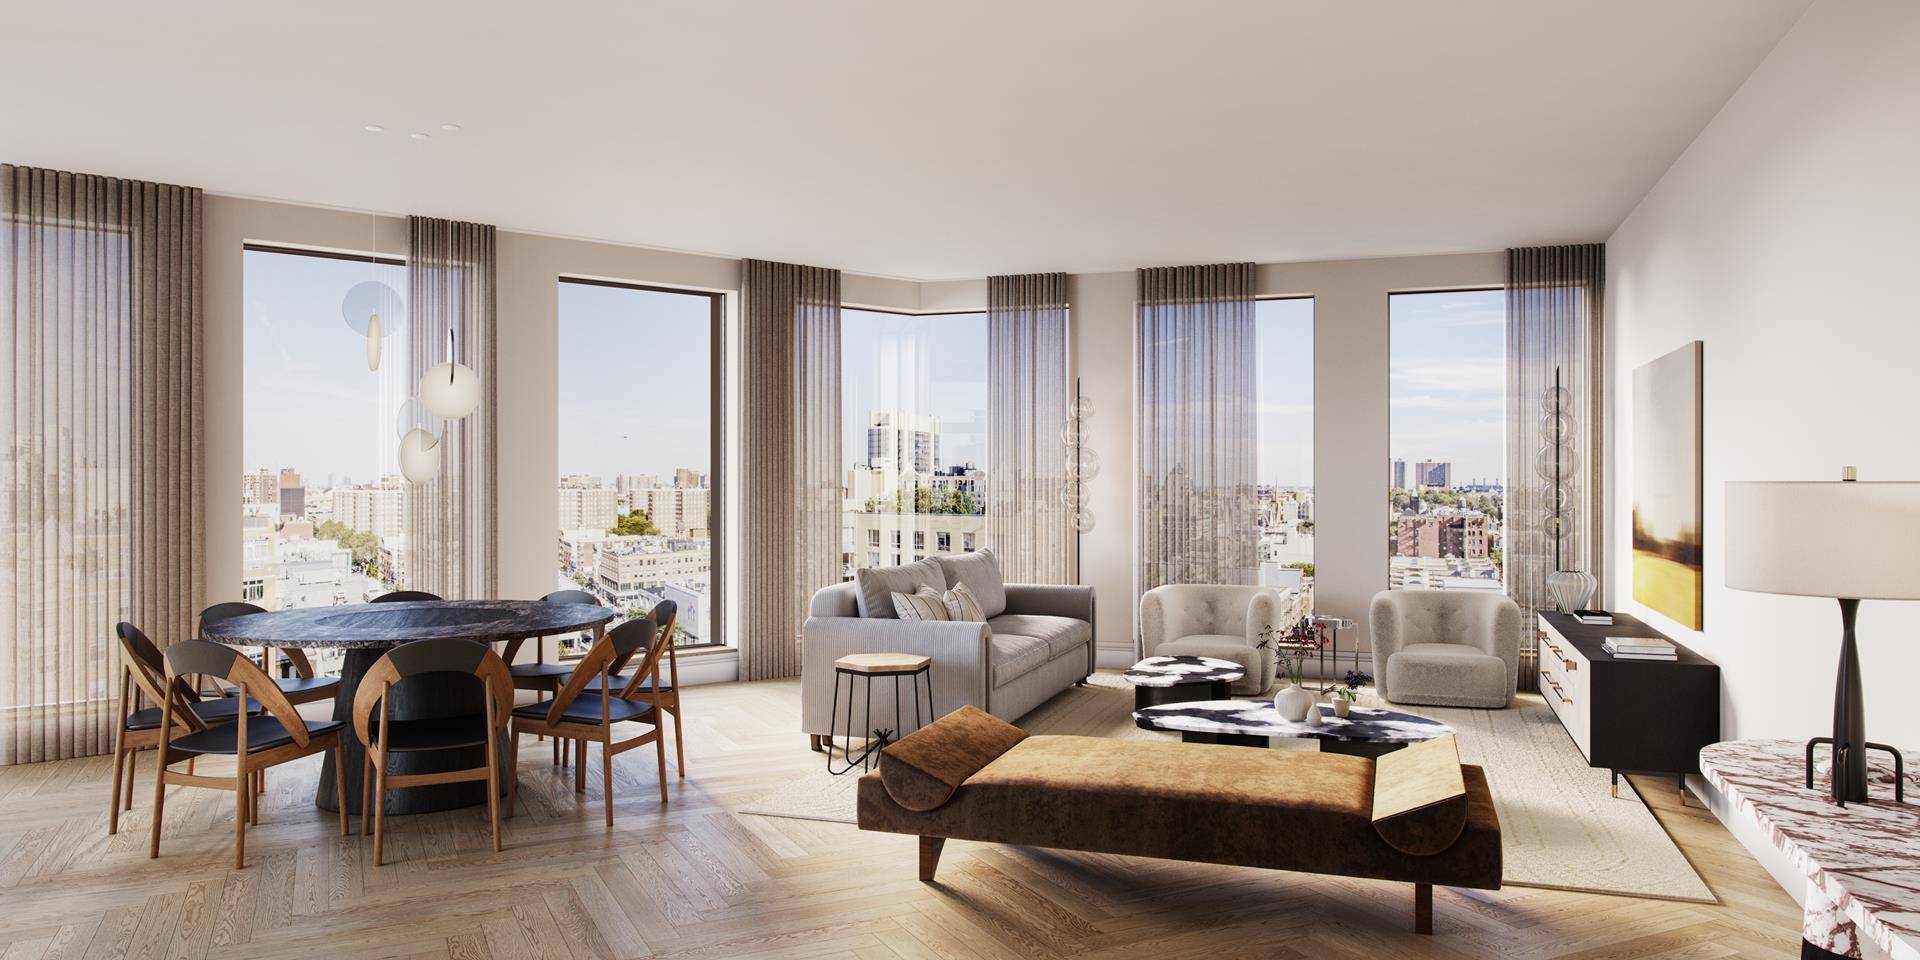 Sales Gallery Now Open By Appointment Introducing the immaculate residence 6K at 300 West, a 1, 000 square foot double exposure two bedroom, two bathroom, offering extensive living dining space ...